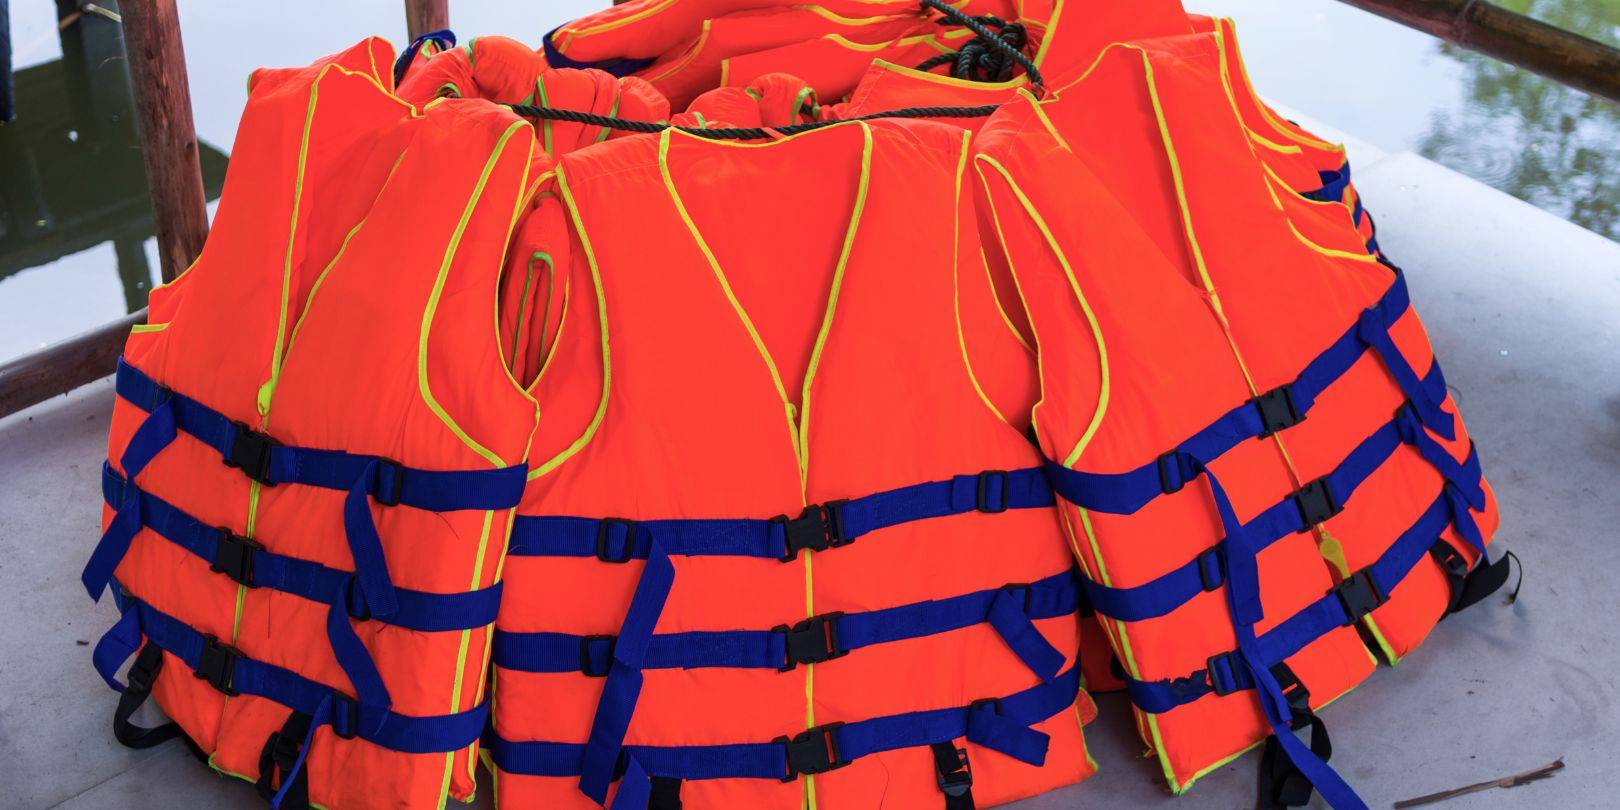 Bright orange life jackets stacked together, ensuring compliance with Panama City's boating regulations for safety on the water.